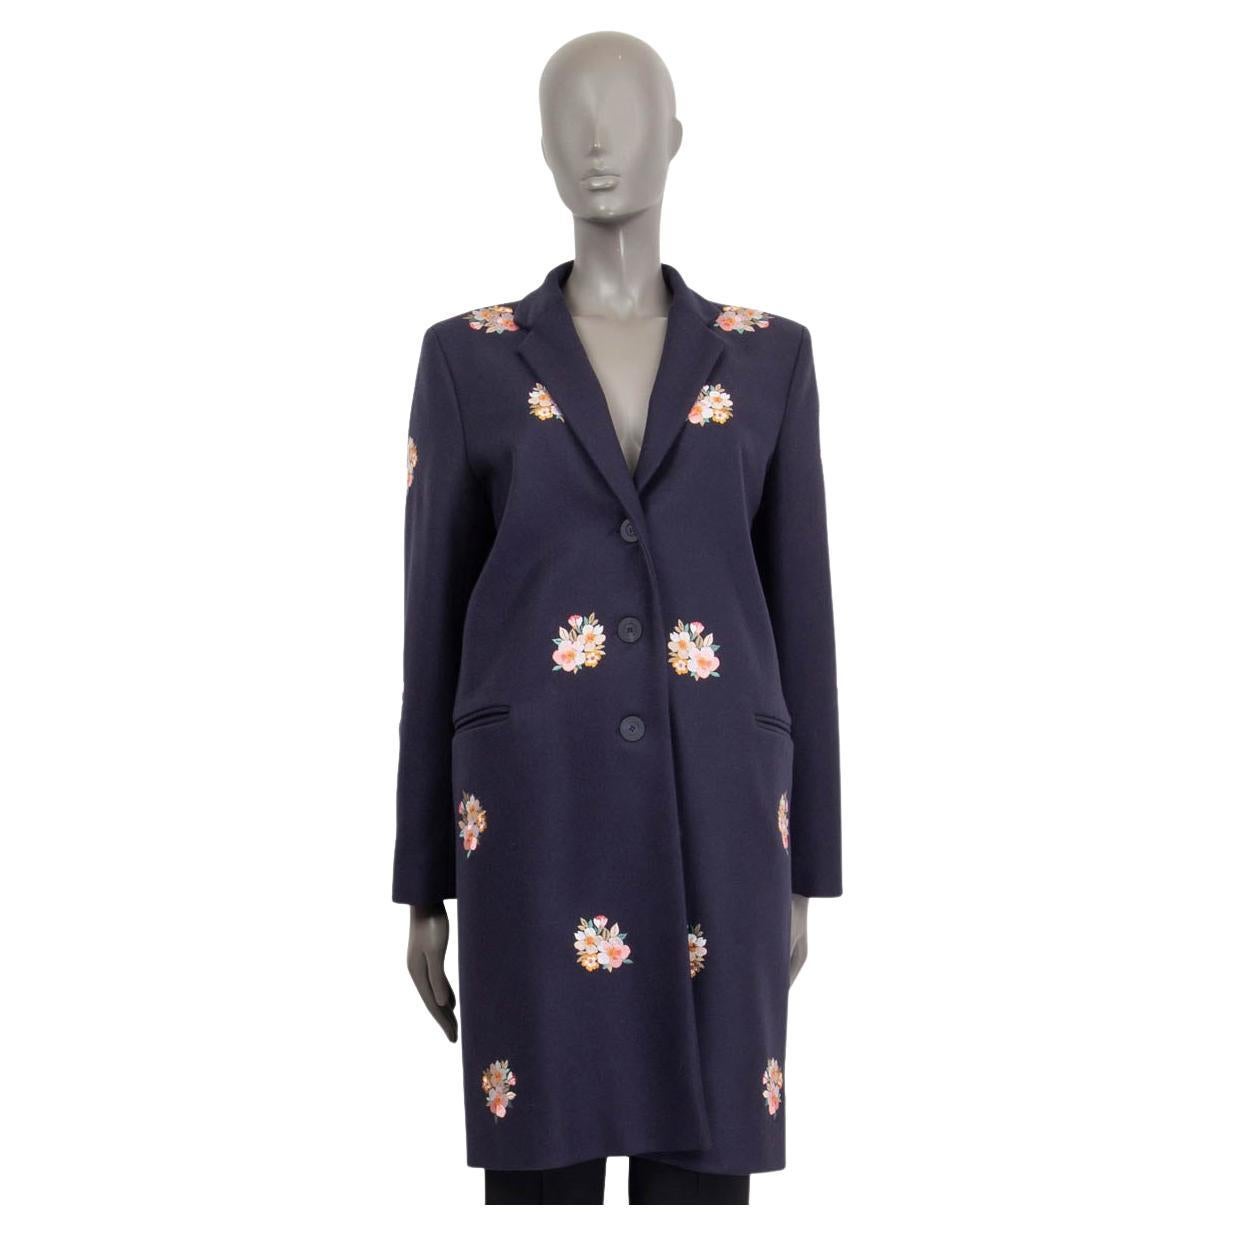 VILSHENKO midnight blue wool FLORAL EMBROIDERED Coat Jacket 10 M For Sale